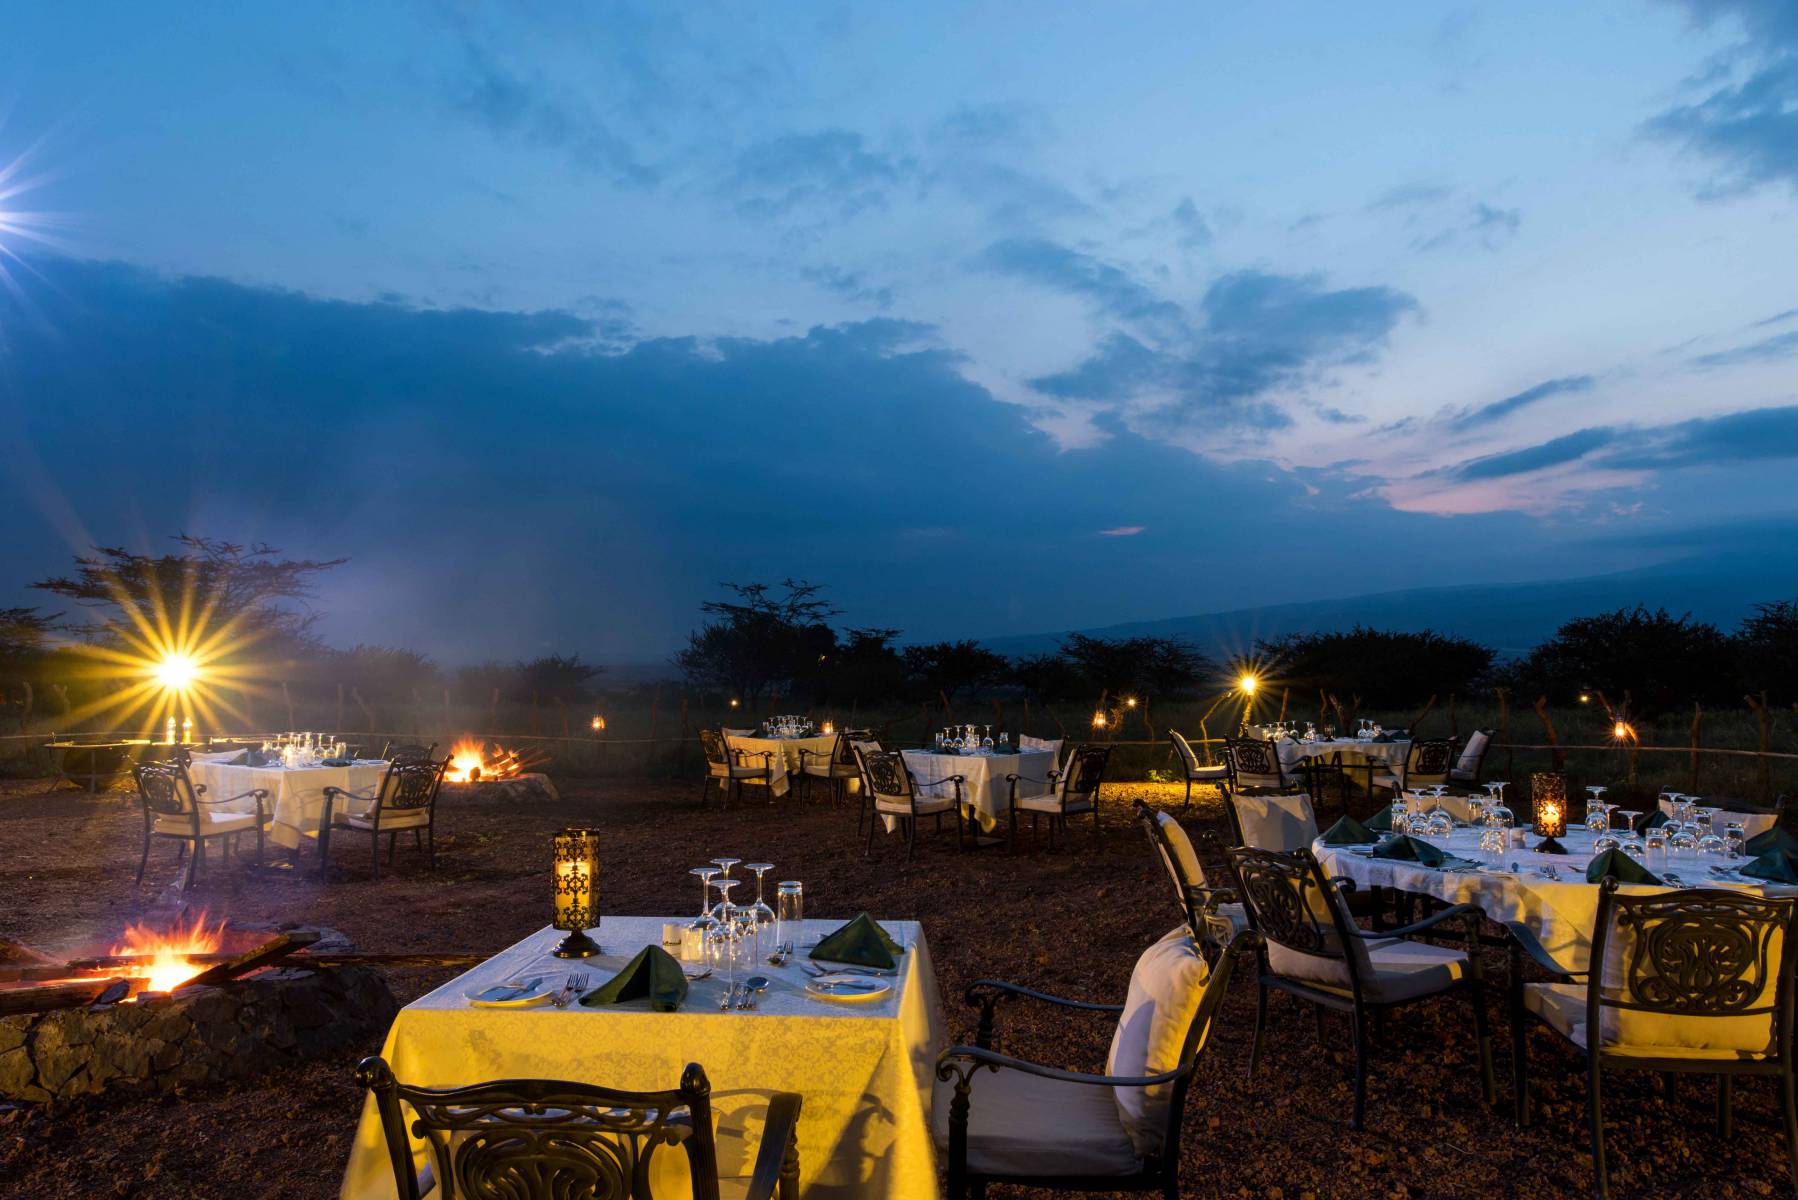 Check out Avens Travel World to book your next bespoke luxury safari